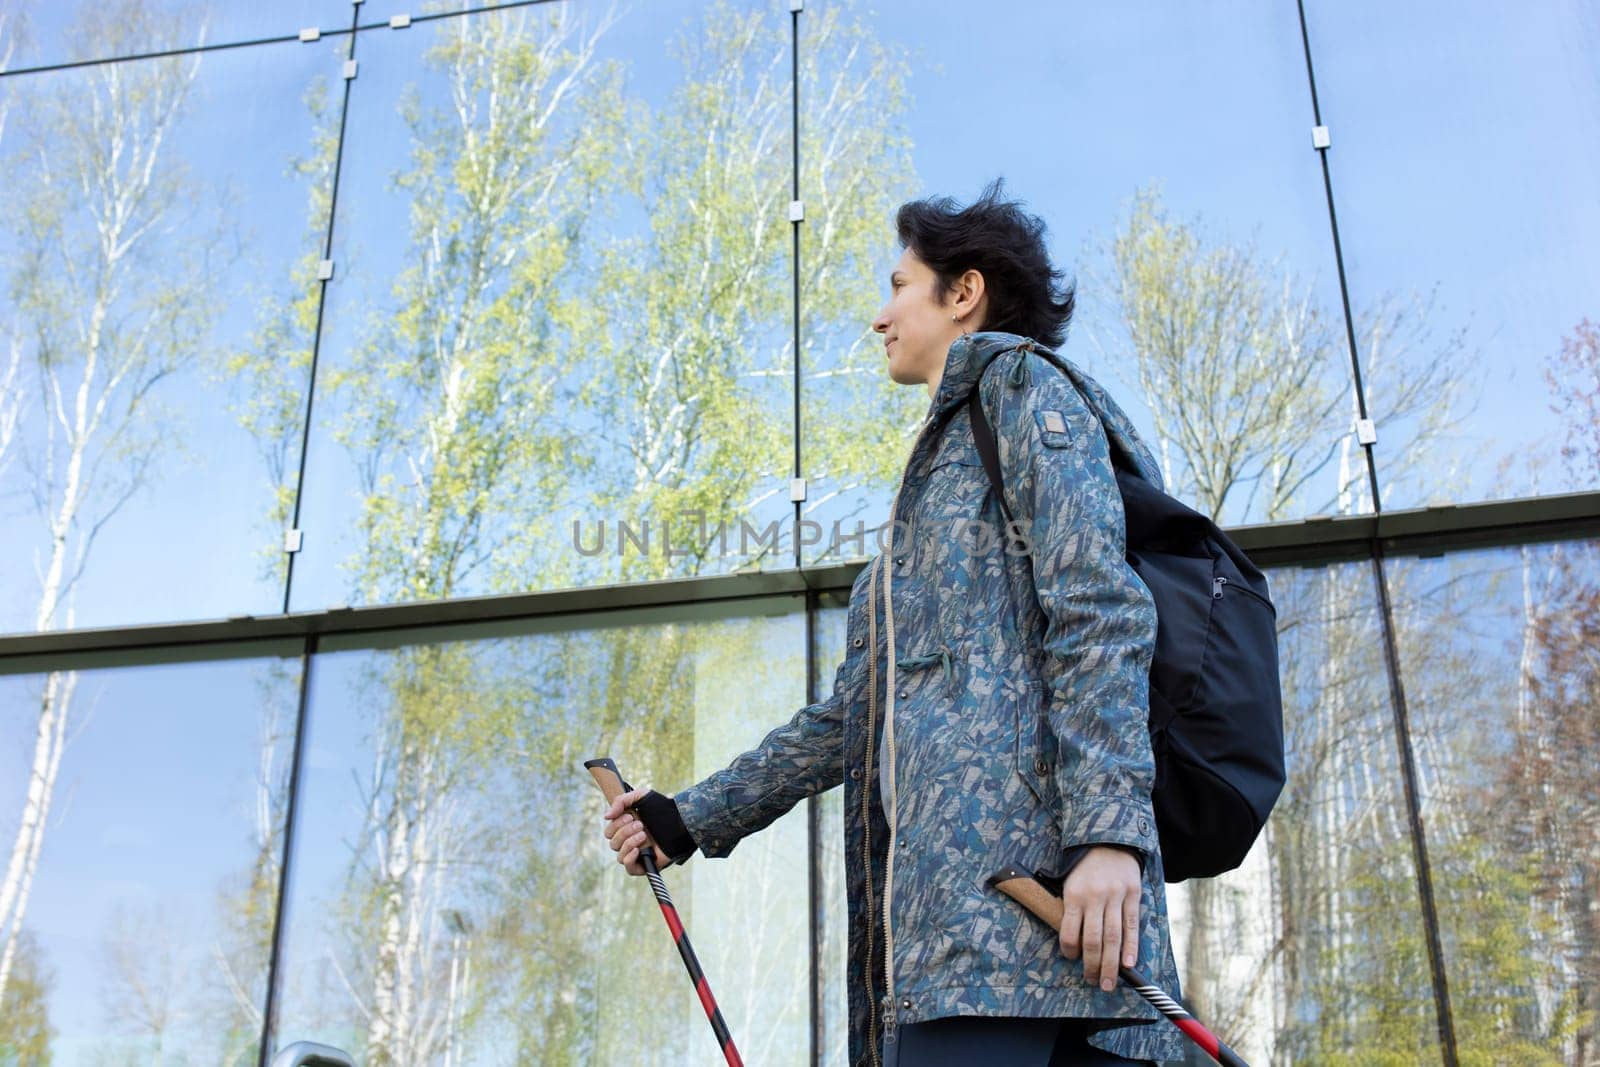 Pole Walking In Urban City. Beautiful Happy Caucasian Woman Training With Sticks Outdoor, Modern Glass Eco Building on Background. Physical Activity, Nordic Walk, Recreation. Horizontal Plane.